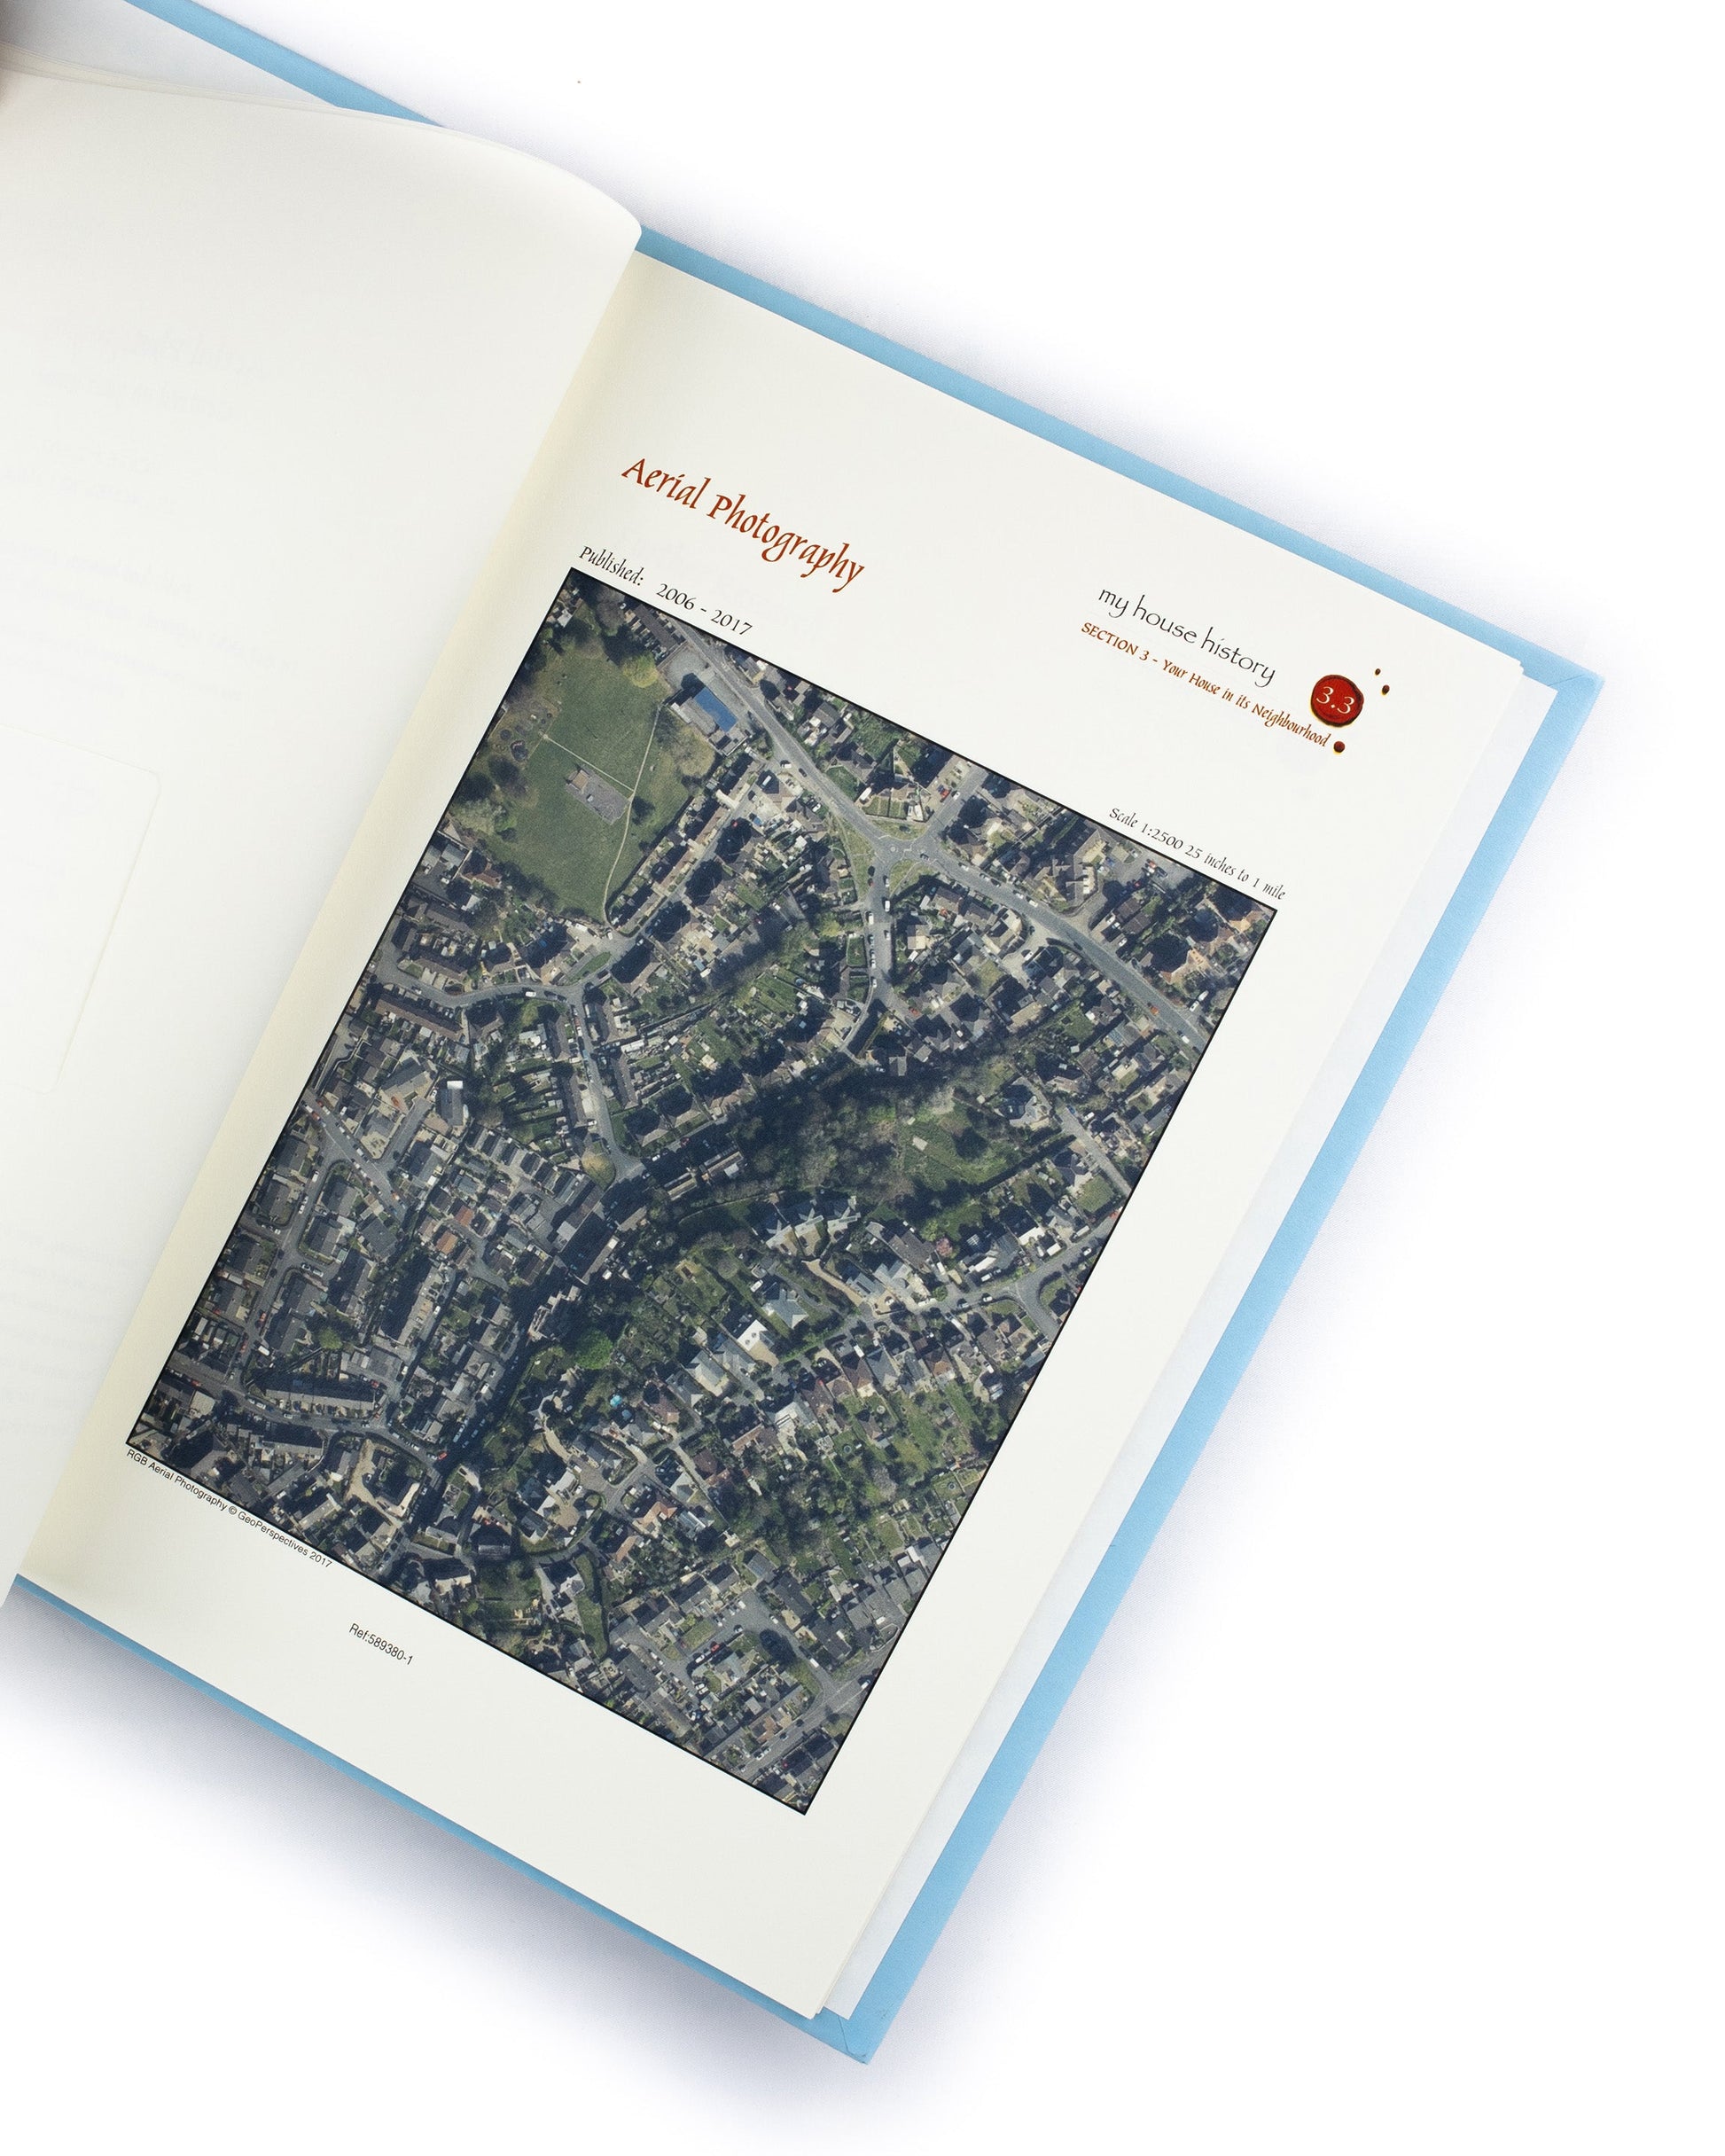 My House History - A Personalised Map Portfolio